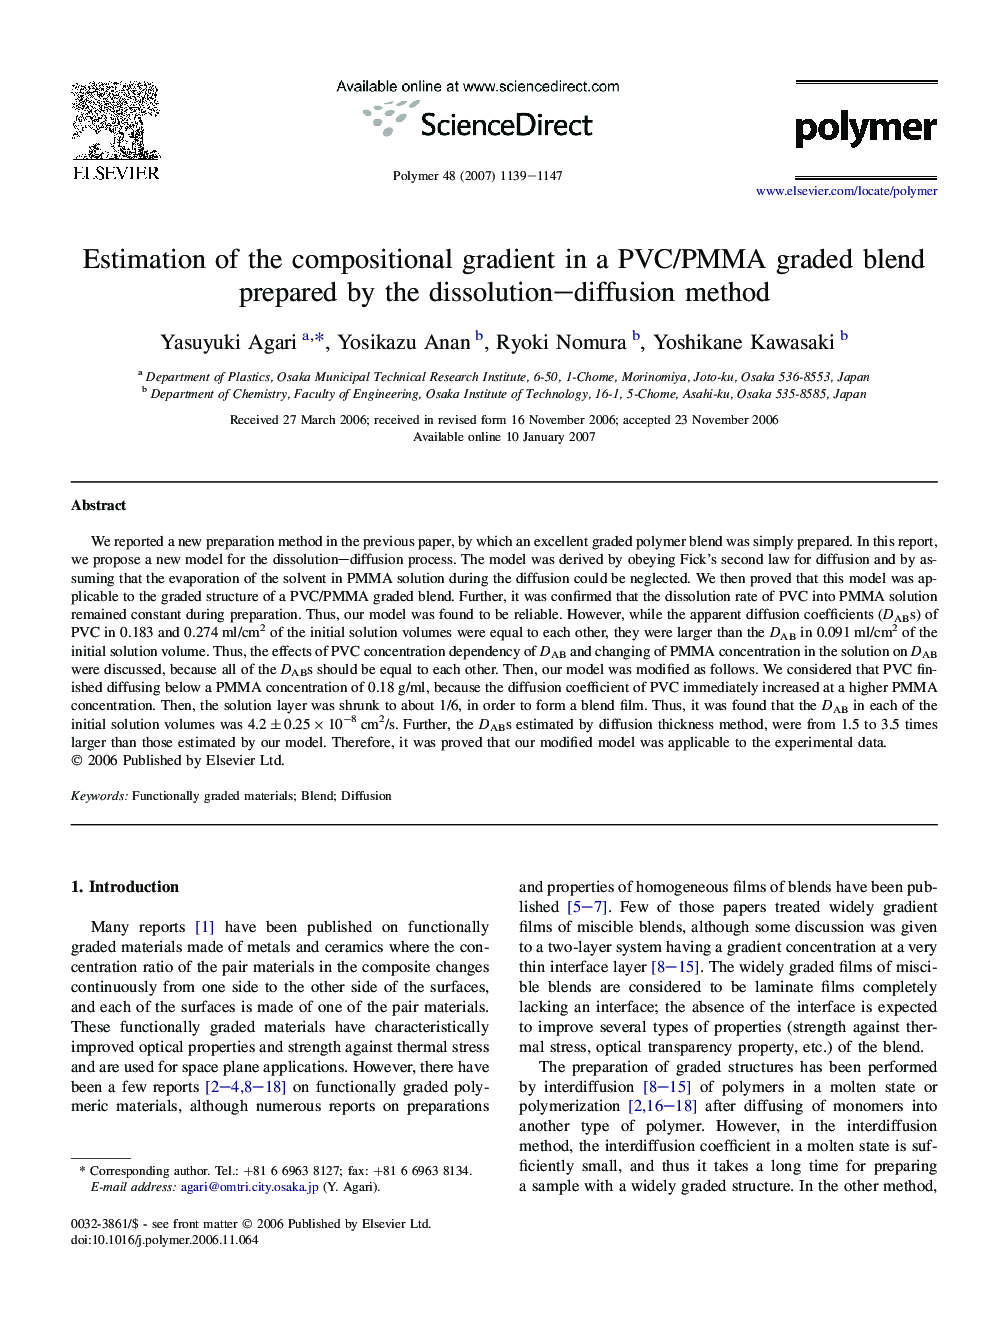 Estimation of the compositional gradient in a PVC/PMMA graded blend prepared by the dissolution-diffusion method